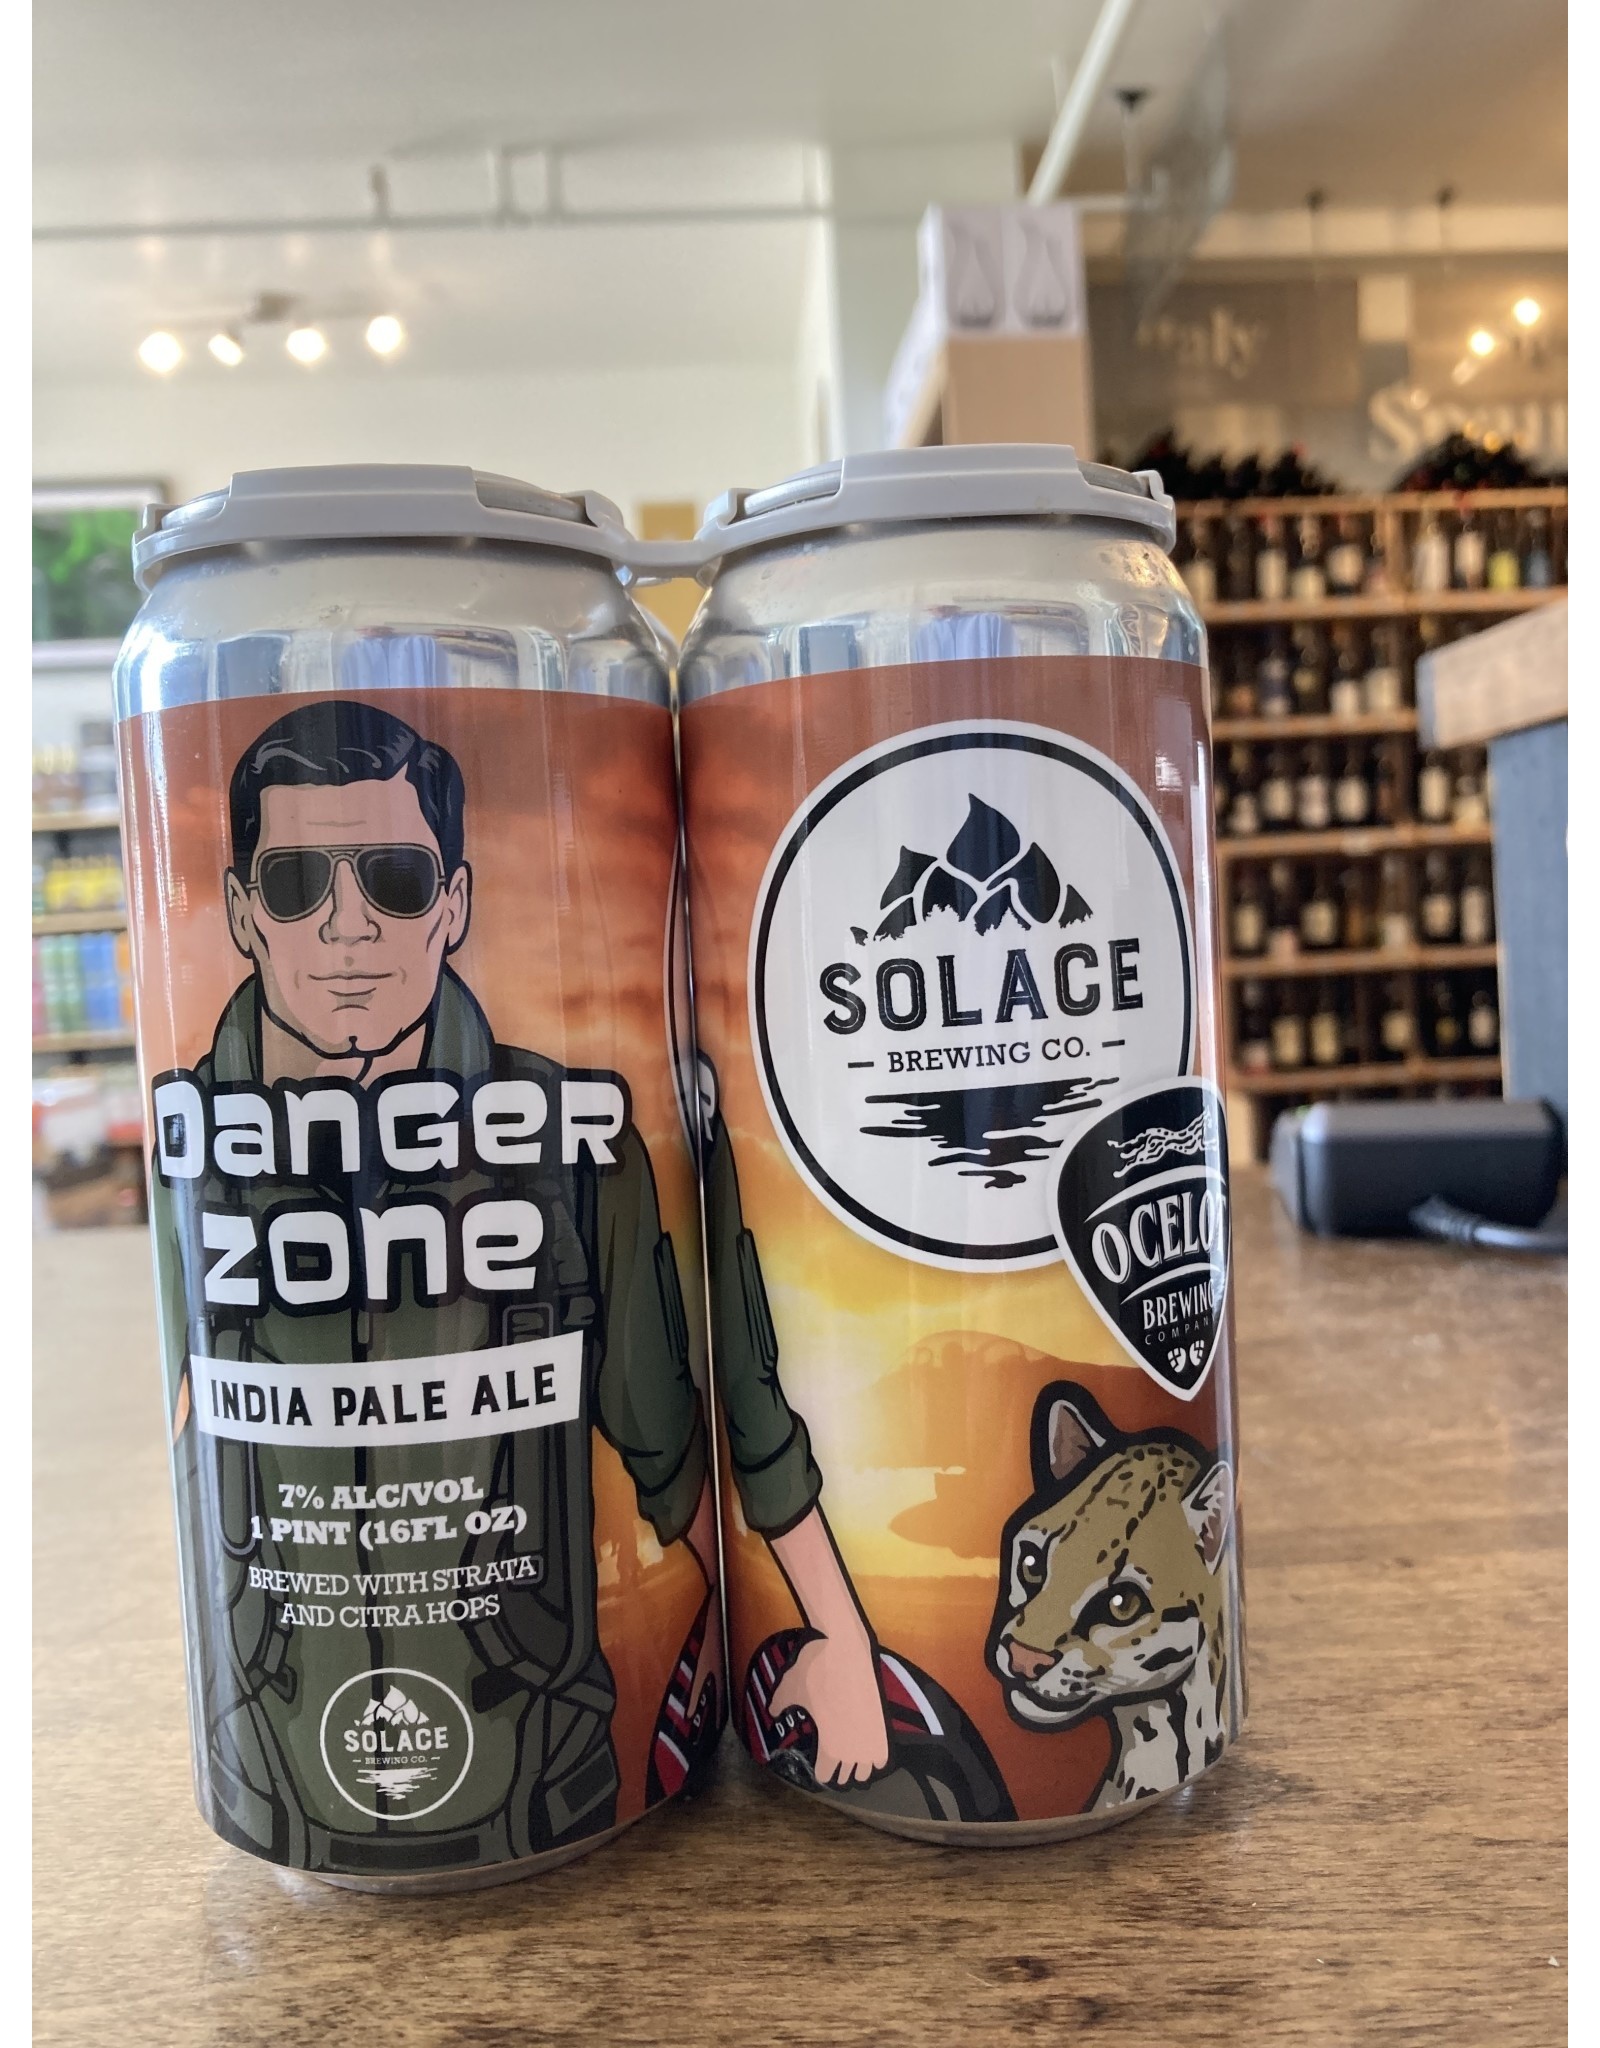 Solace Solace Brewing Co & Ocelot Brewing "Danger Zone" IPA